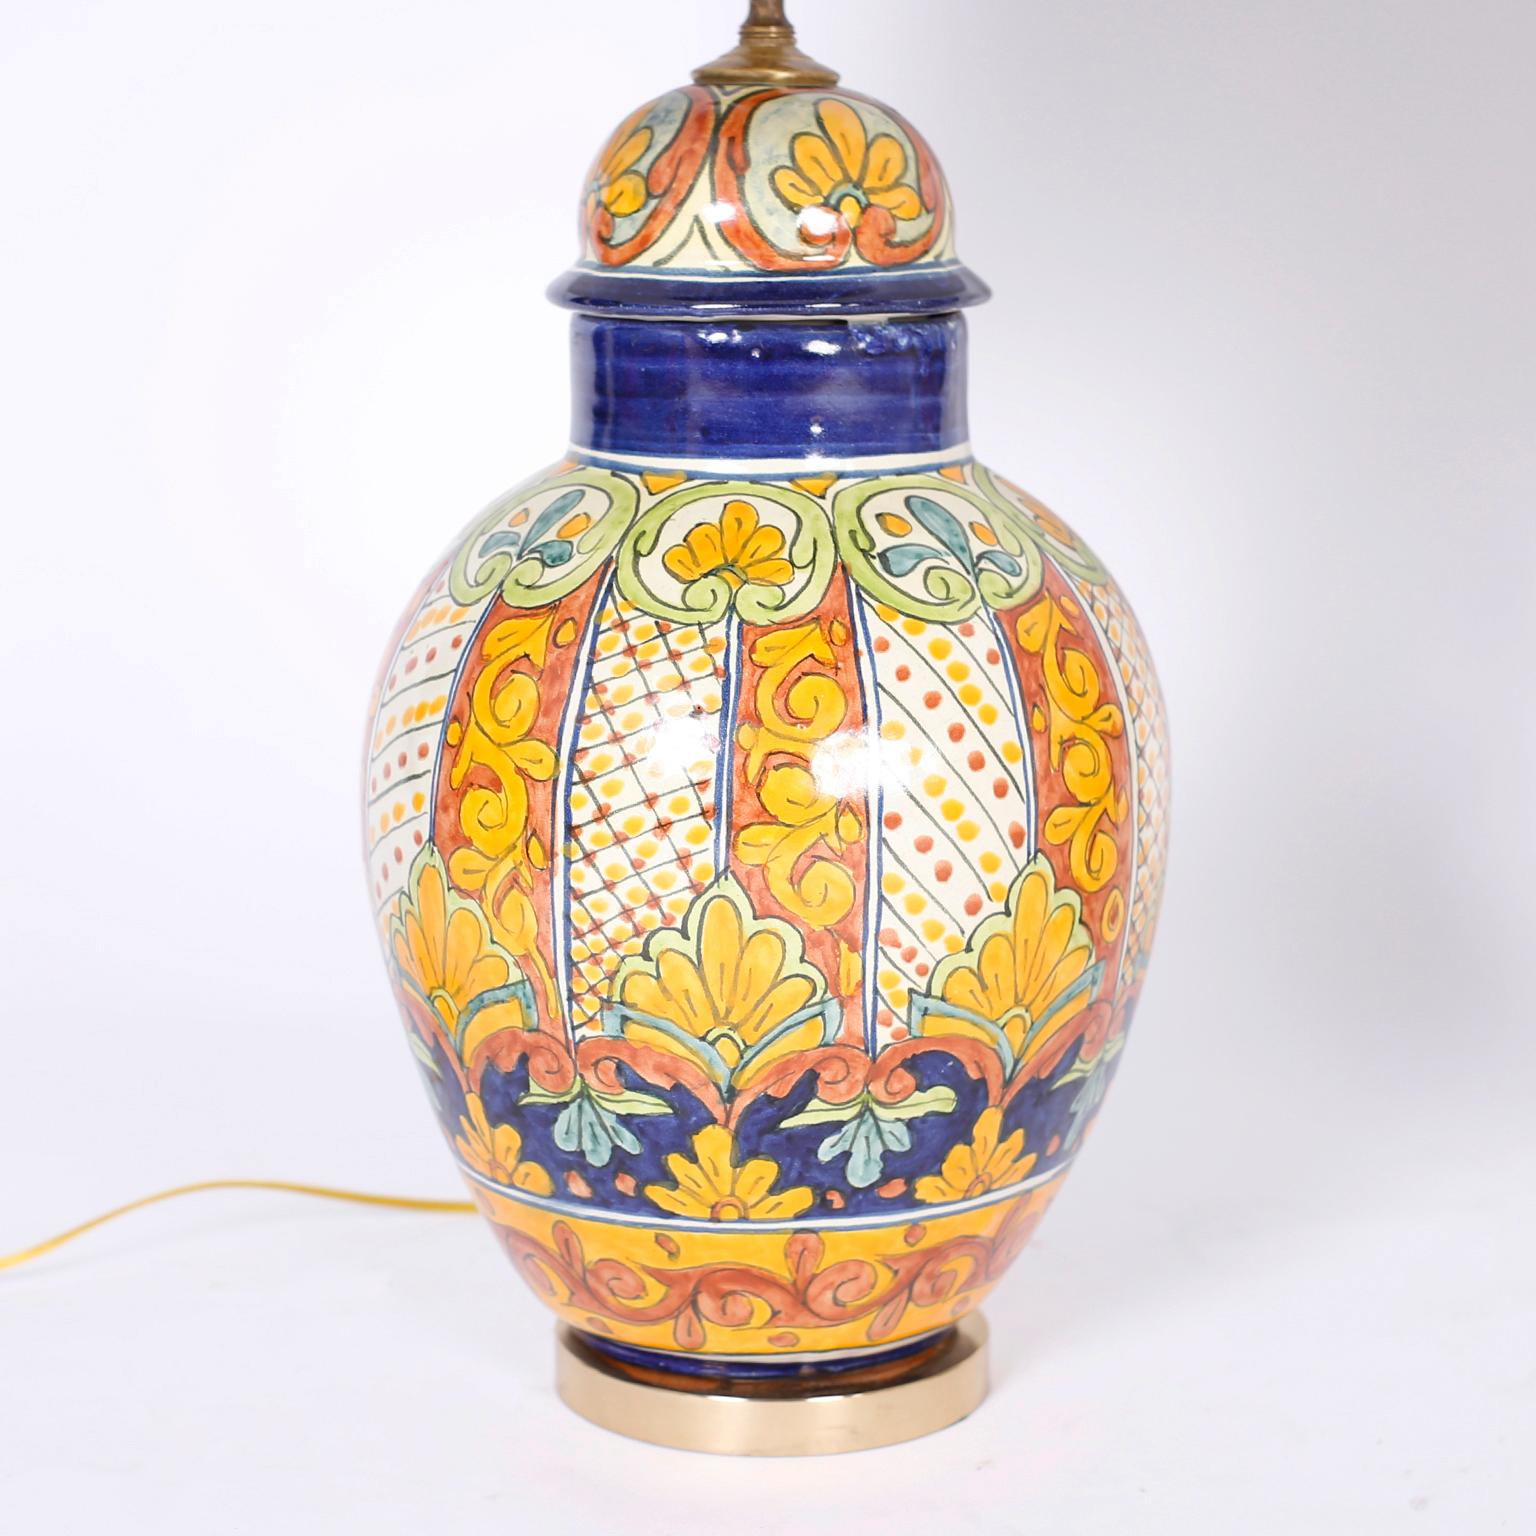 Near pair of table lamps crafted in terracotta with a classic urn form hand decorated under glaze with floral designs in distinctive Mediterranean colors presented on brass bases.